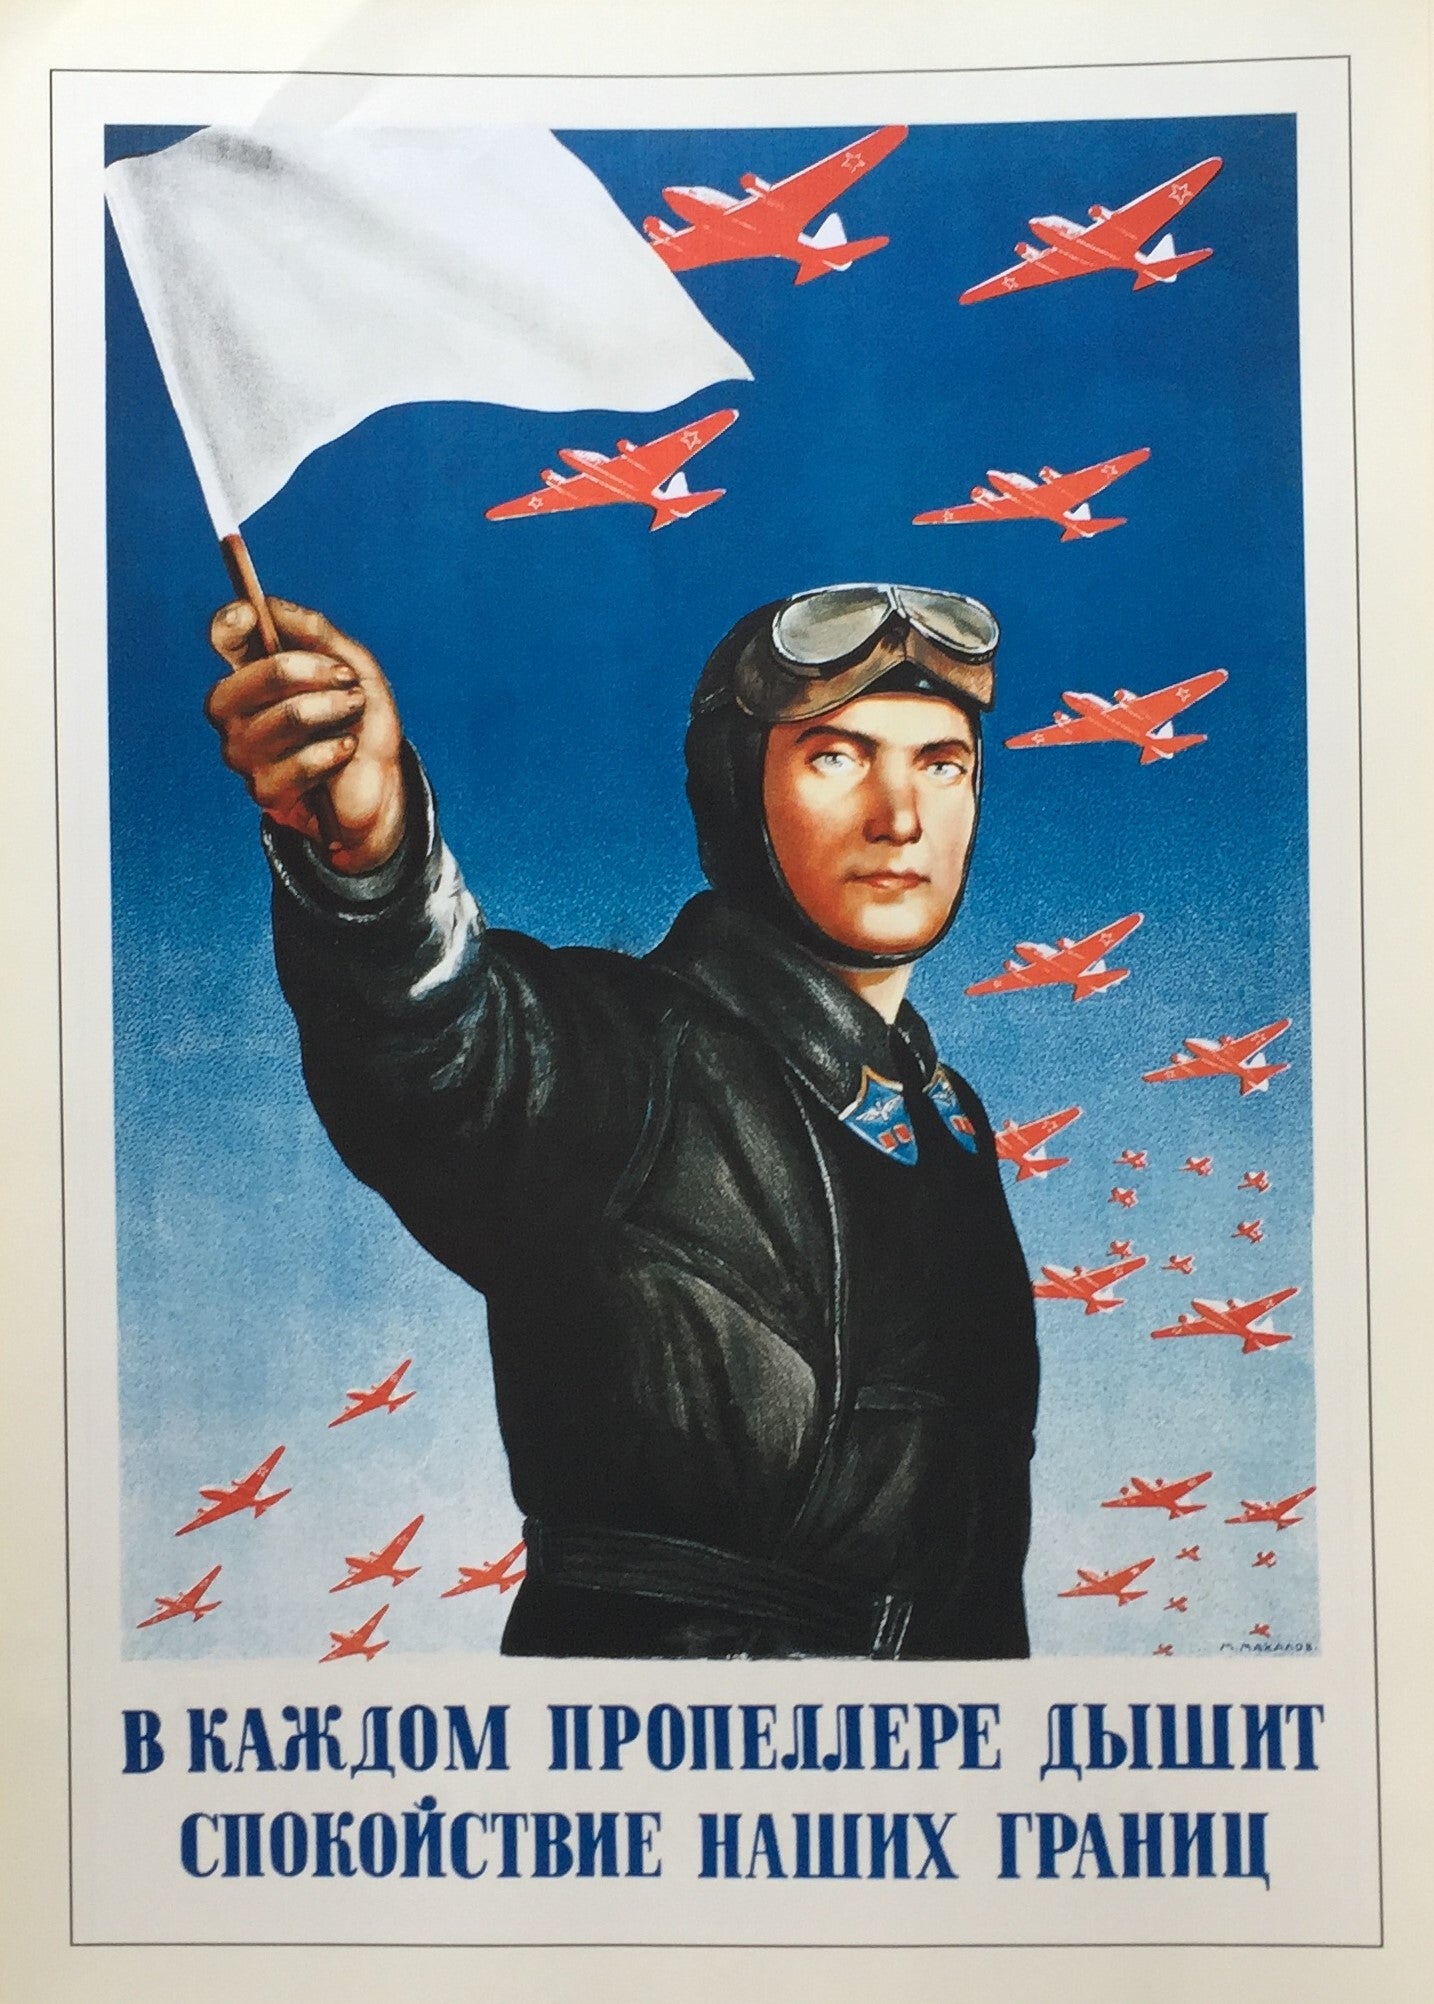 Wings of The Motherland　Planes and Pilots In Russian Poster　祖国の翼　ロシアのポスター　飛行機とパイロット　20枚セット